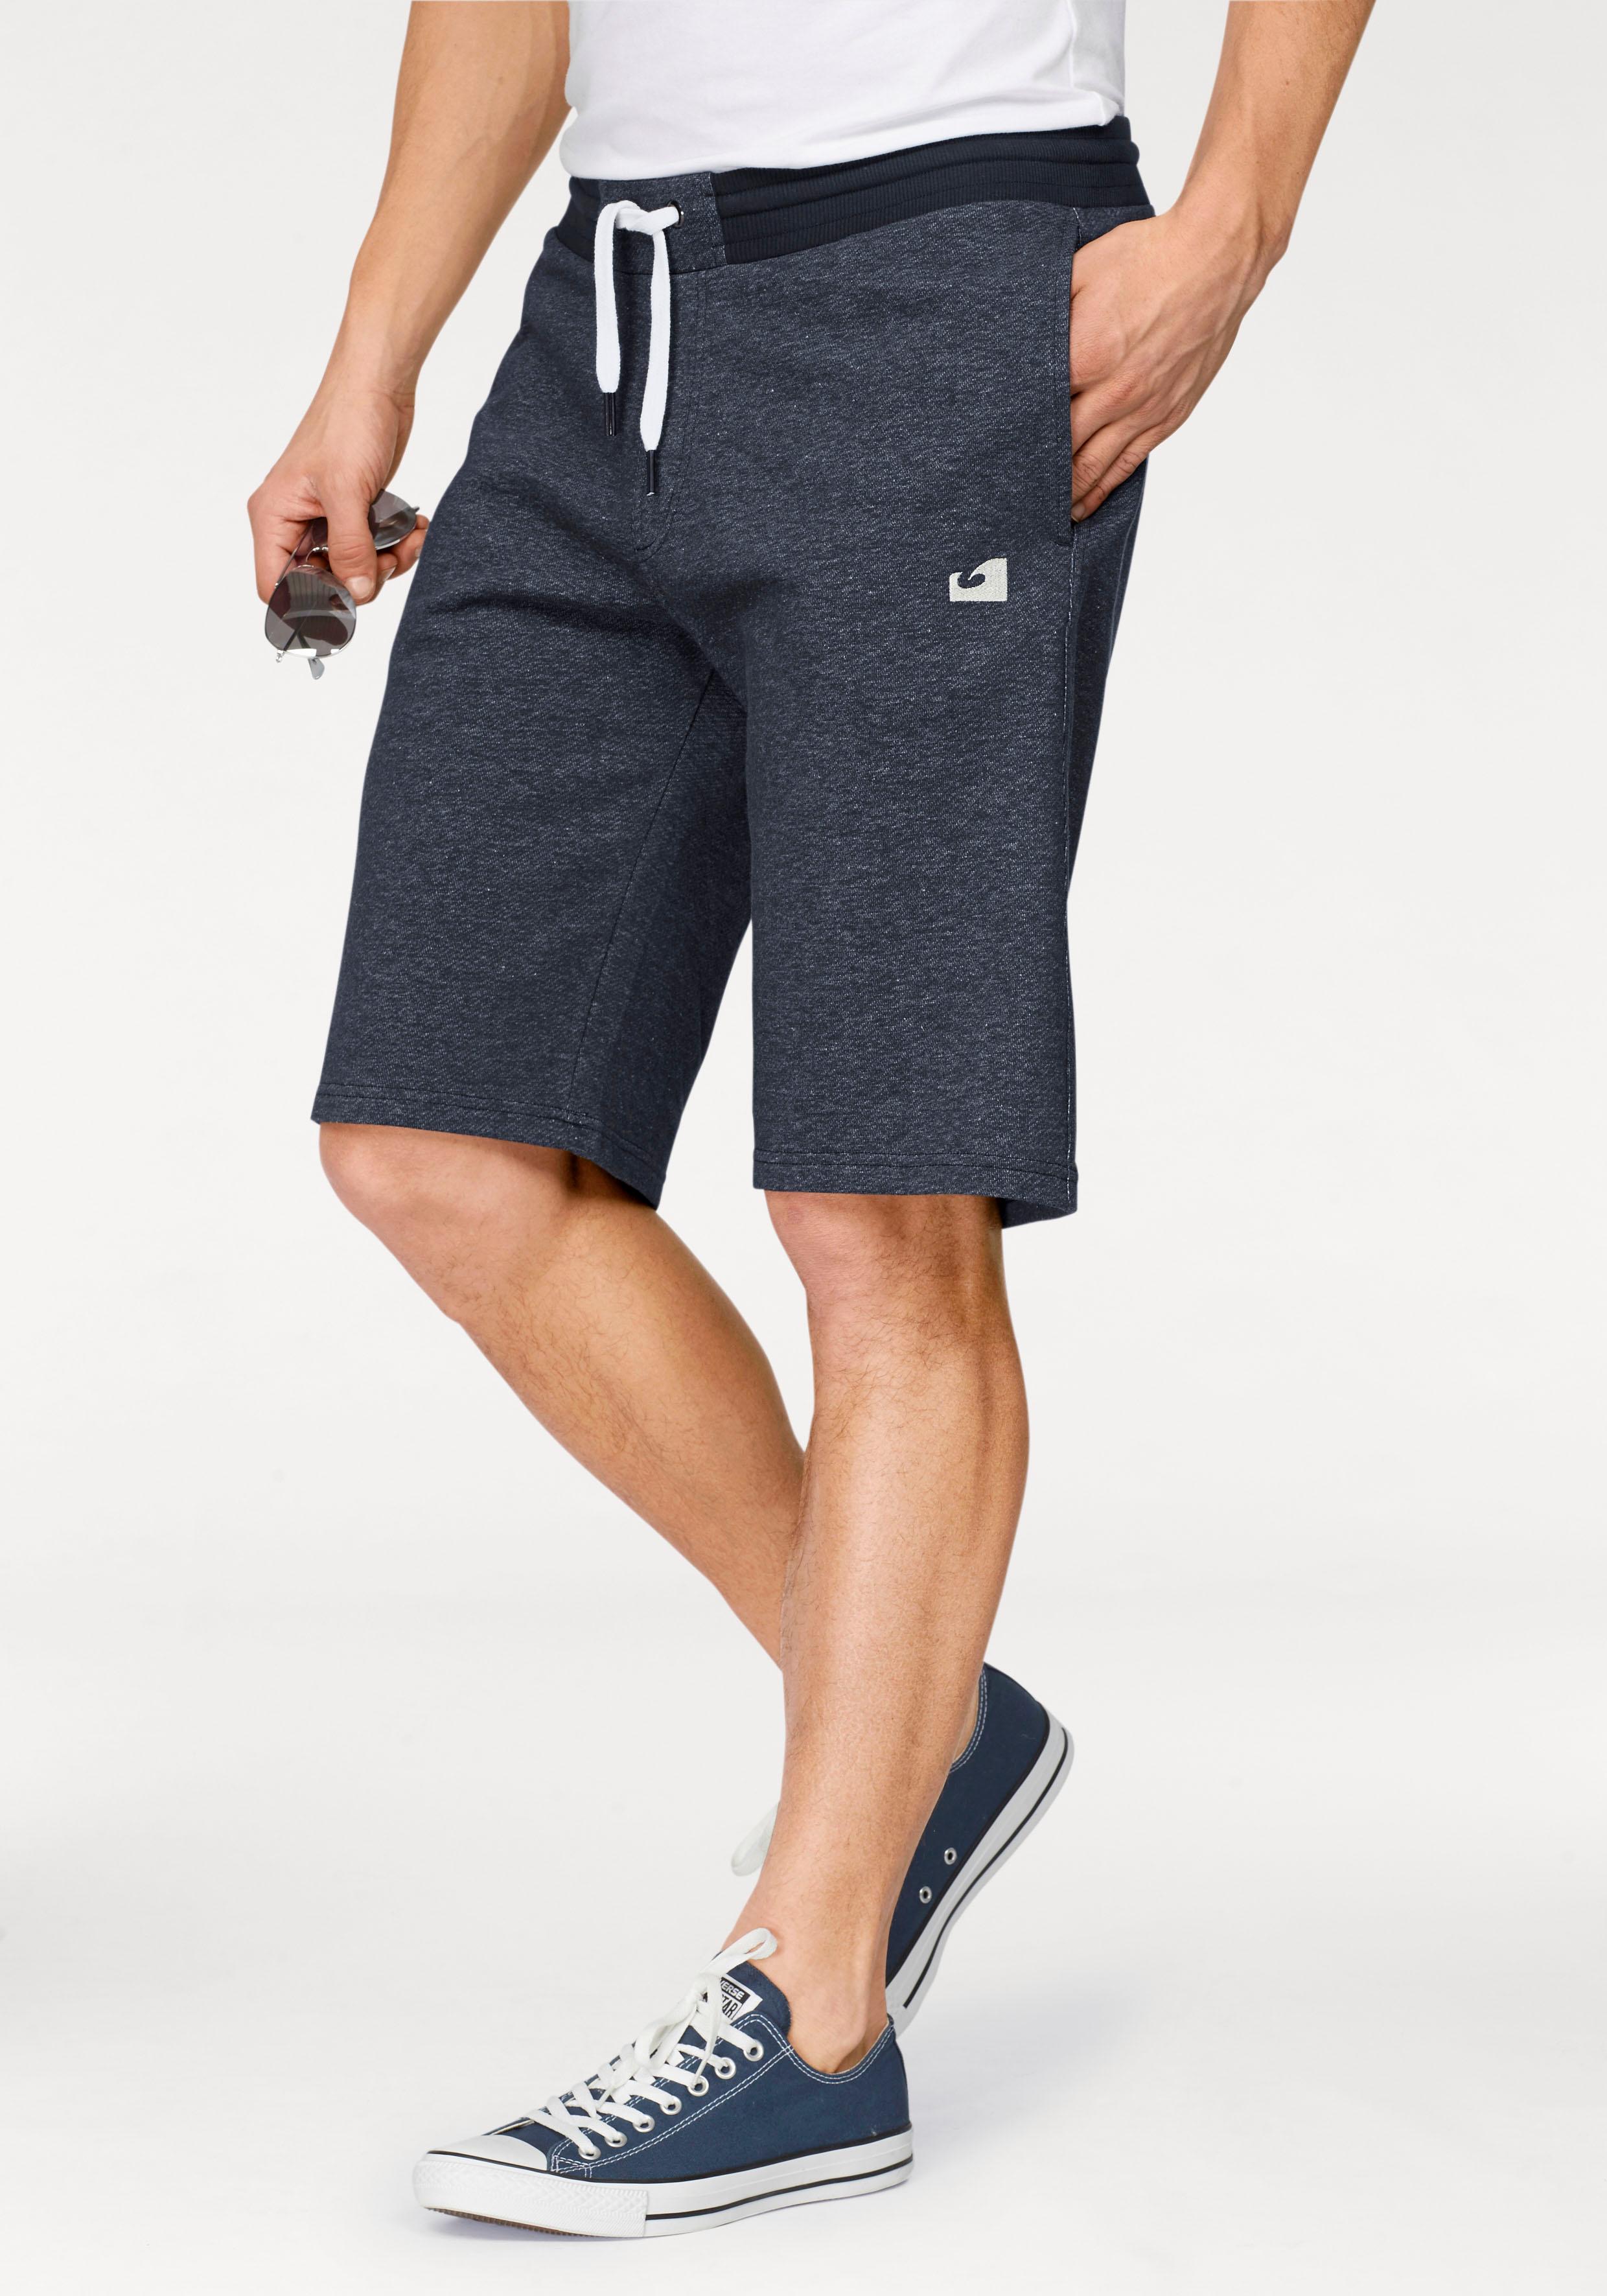 Athleisure Sweat Shorts - Relax Fit